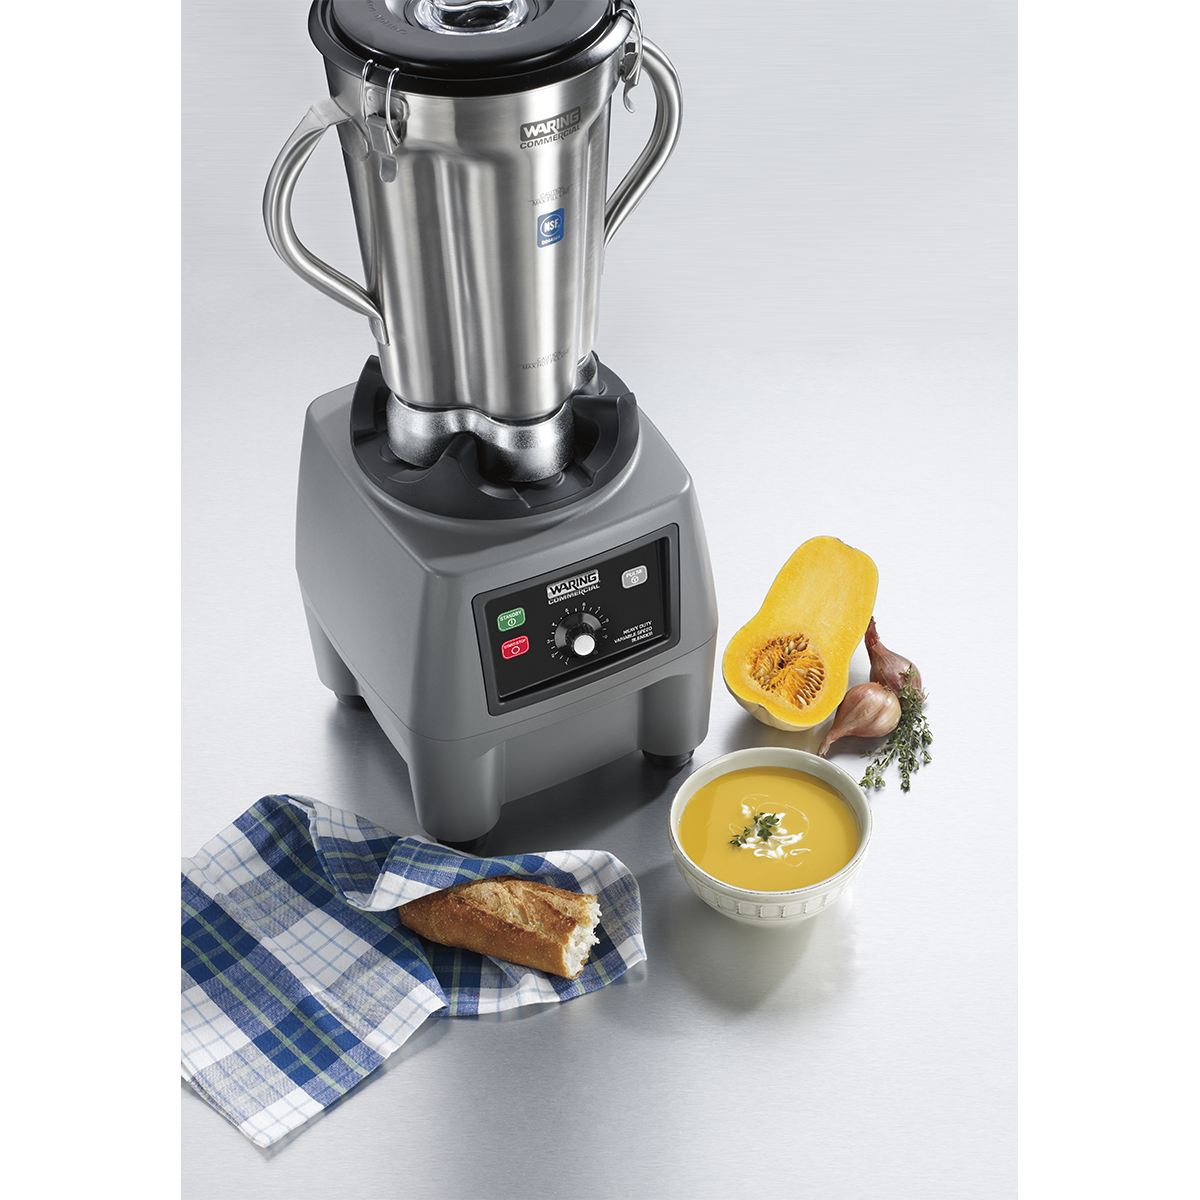 CB15V Heavy-Duty One Gallon Variable Speed Food Blender  by Waring Commercial